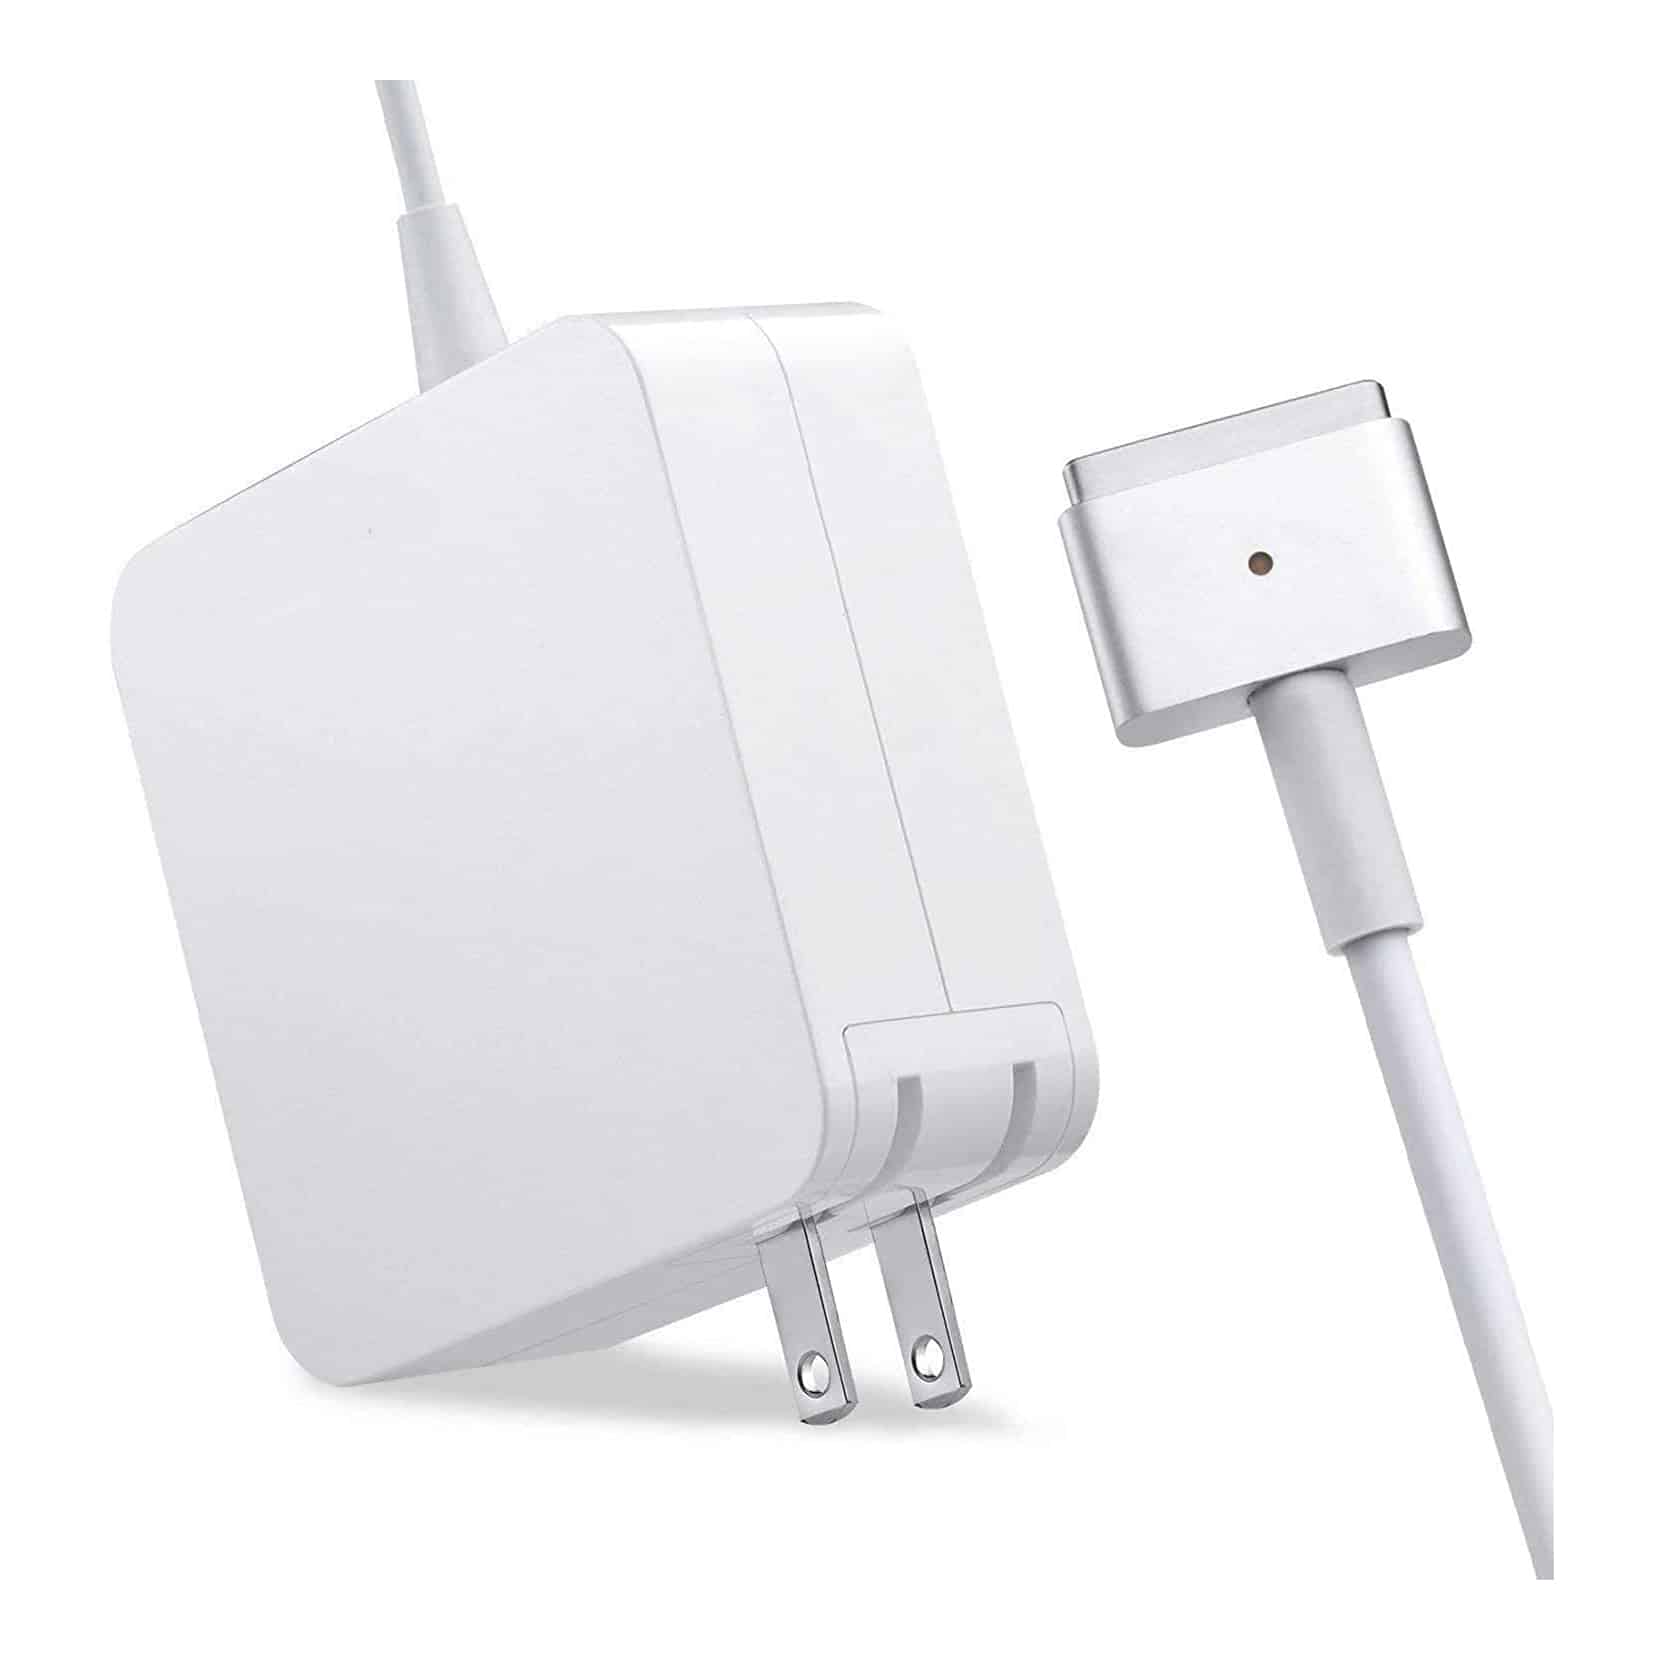 apple macbook pro charger model a1181 2006